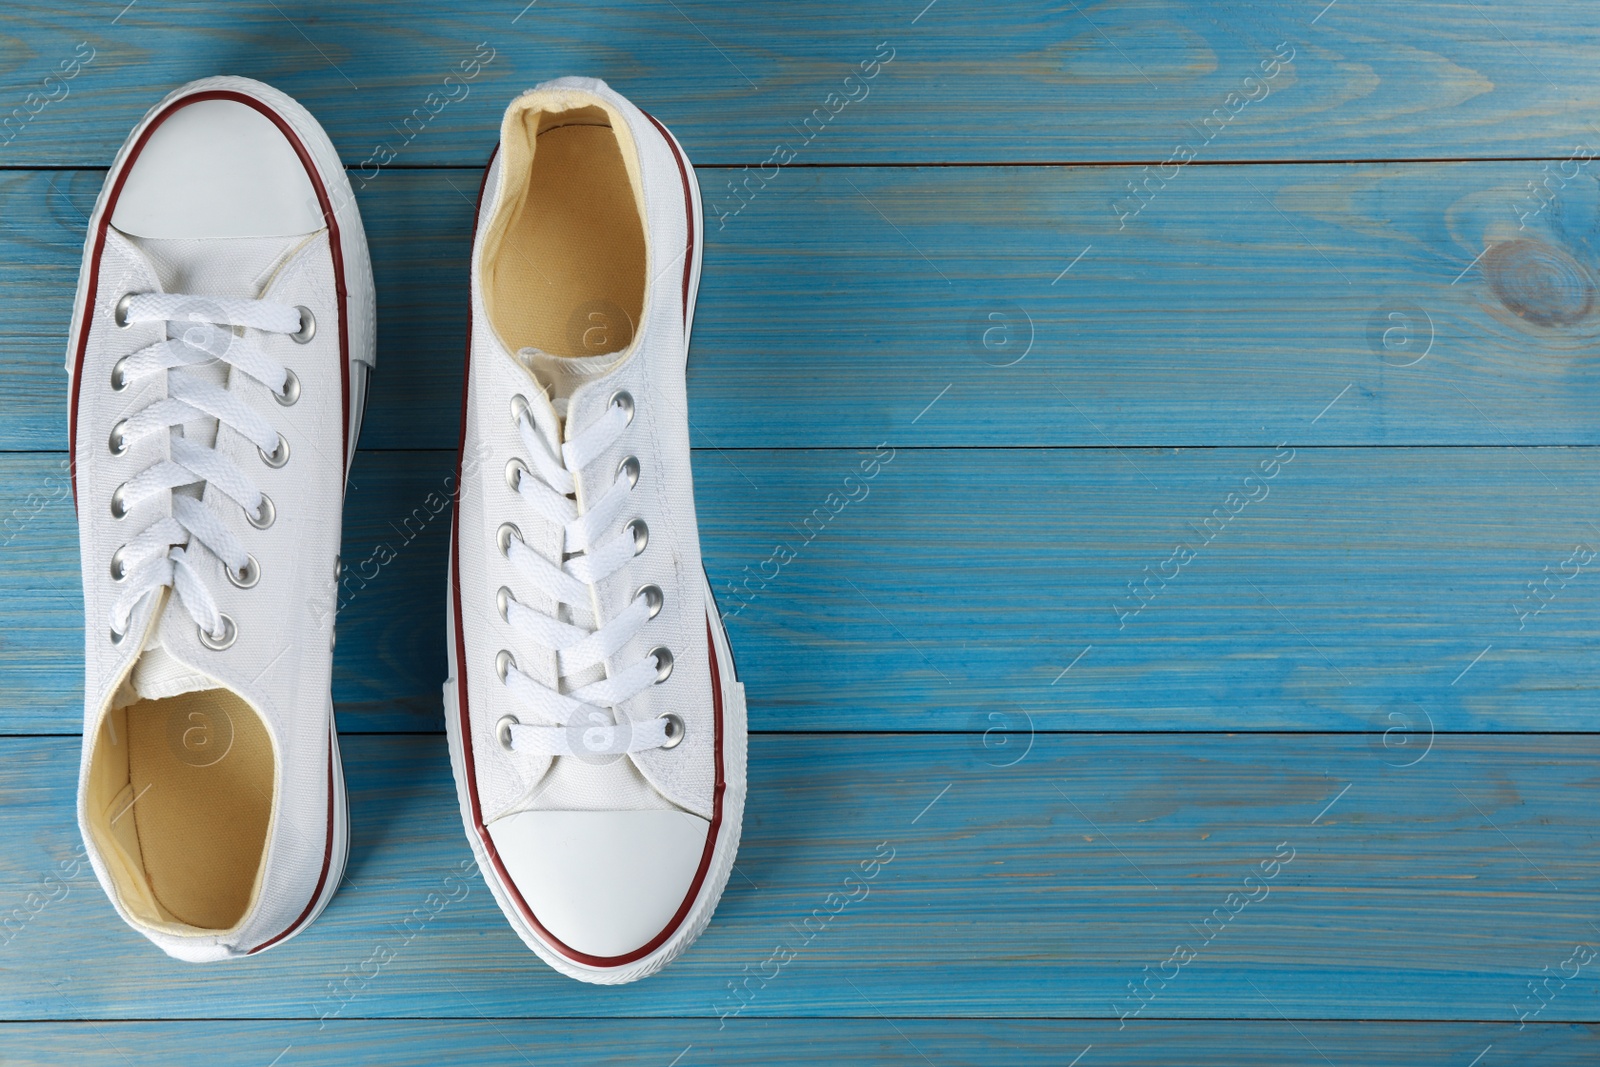 Photo of Pair of white sneakers on light blue wooden table, flat lay. Space for text